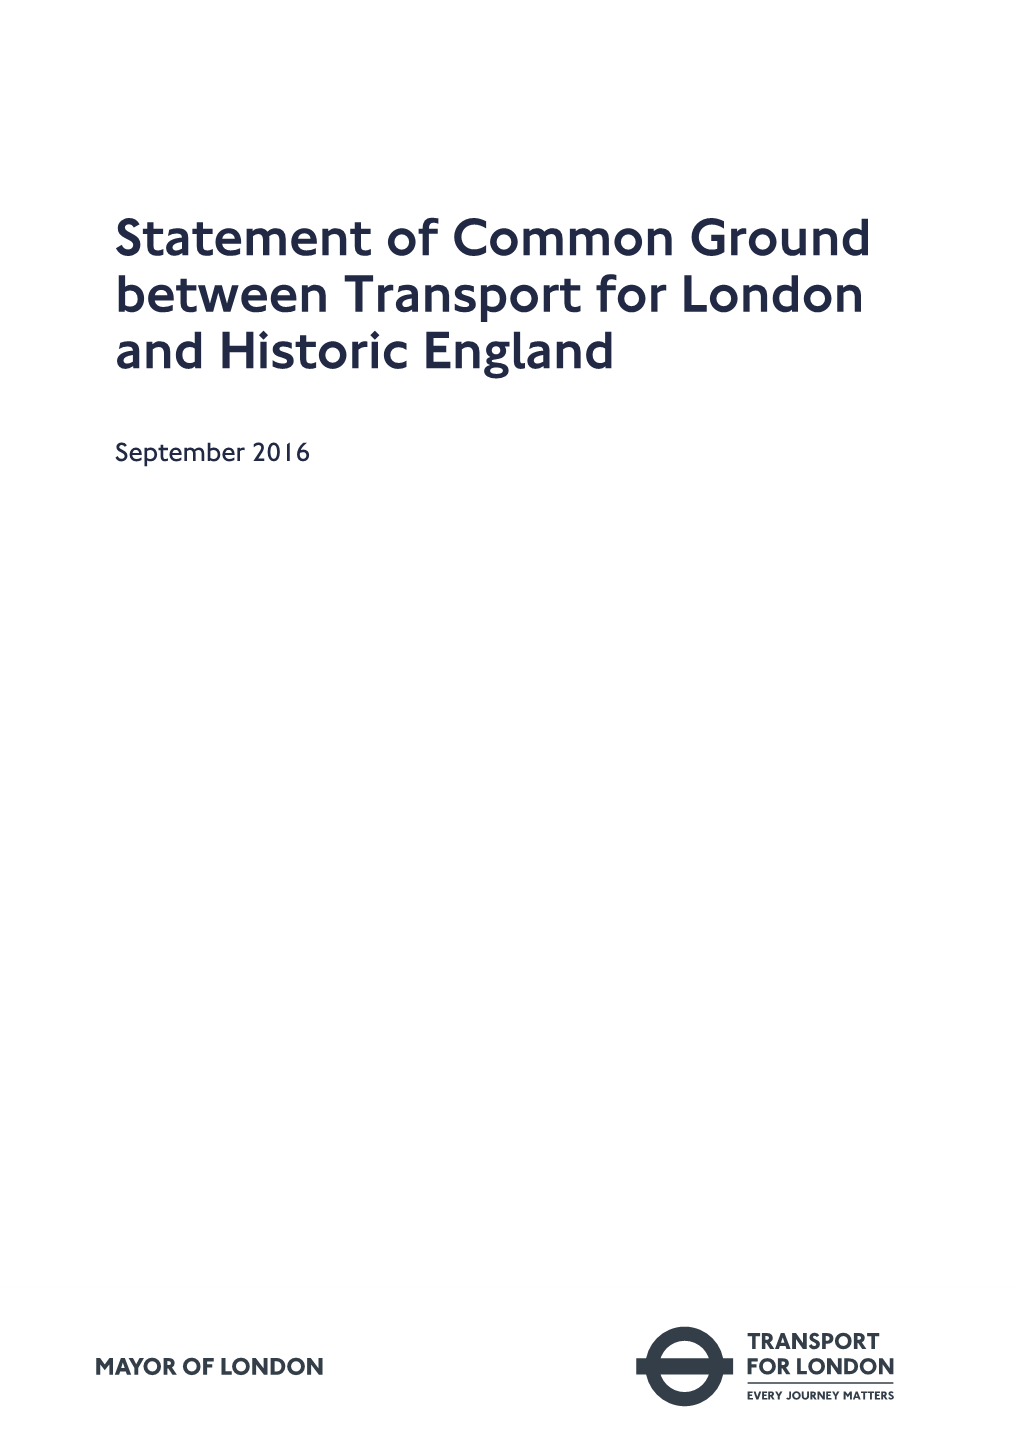 Statement of Common Ground Between Transport for London and Historic England